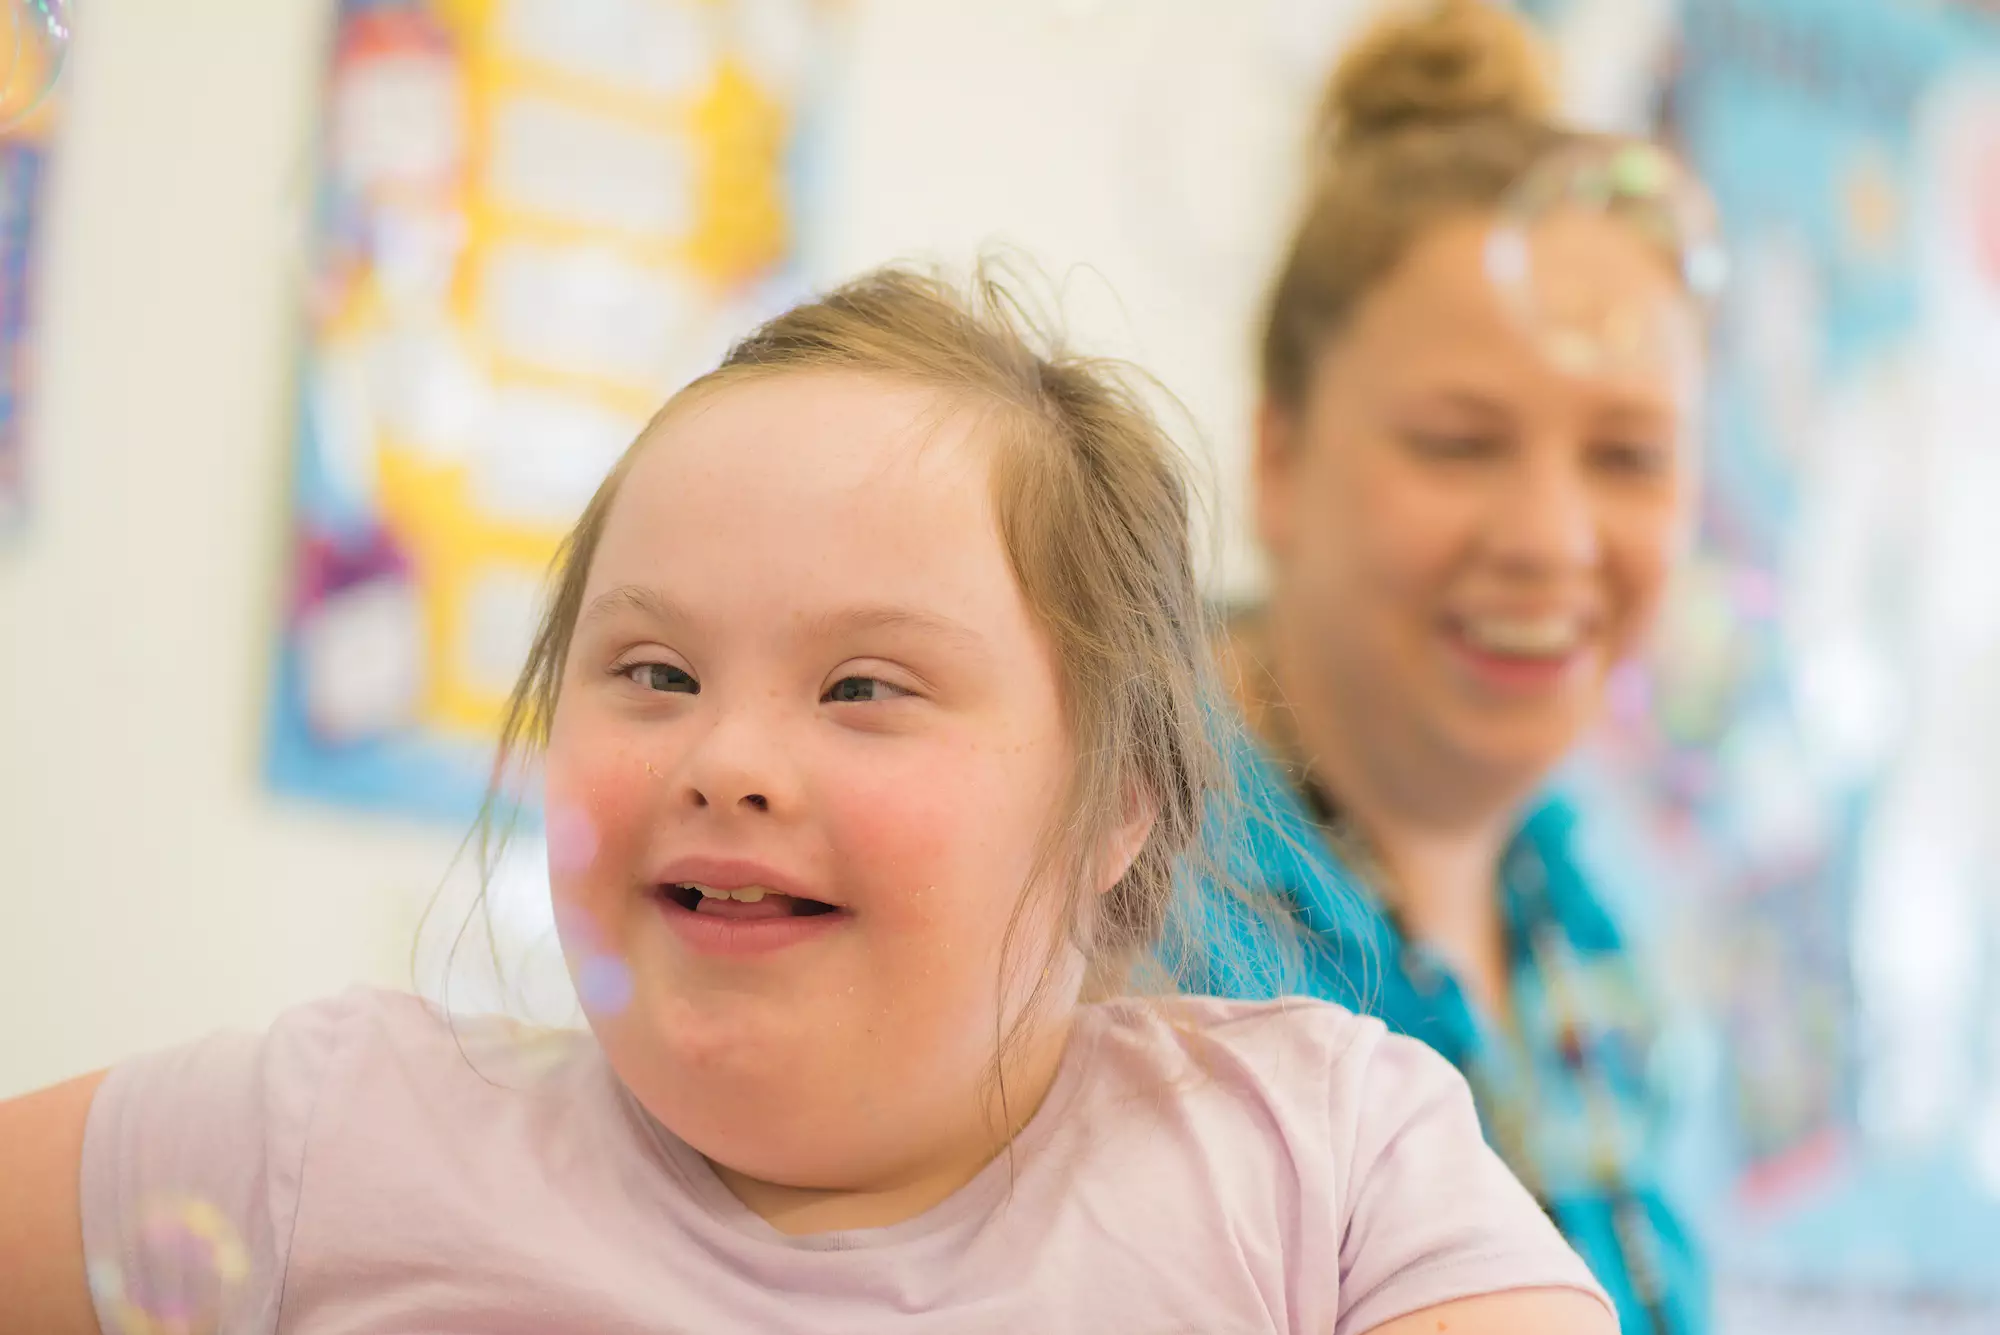 Ysgol y Deri caters to pupils aged 3 to 19 who live with a range of disabilities and learning difficulties (